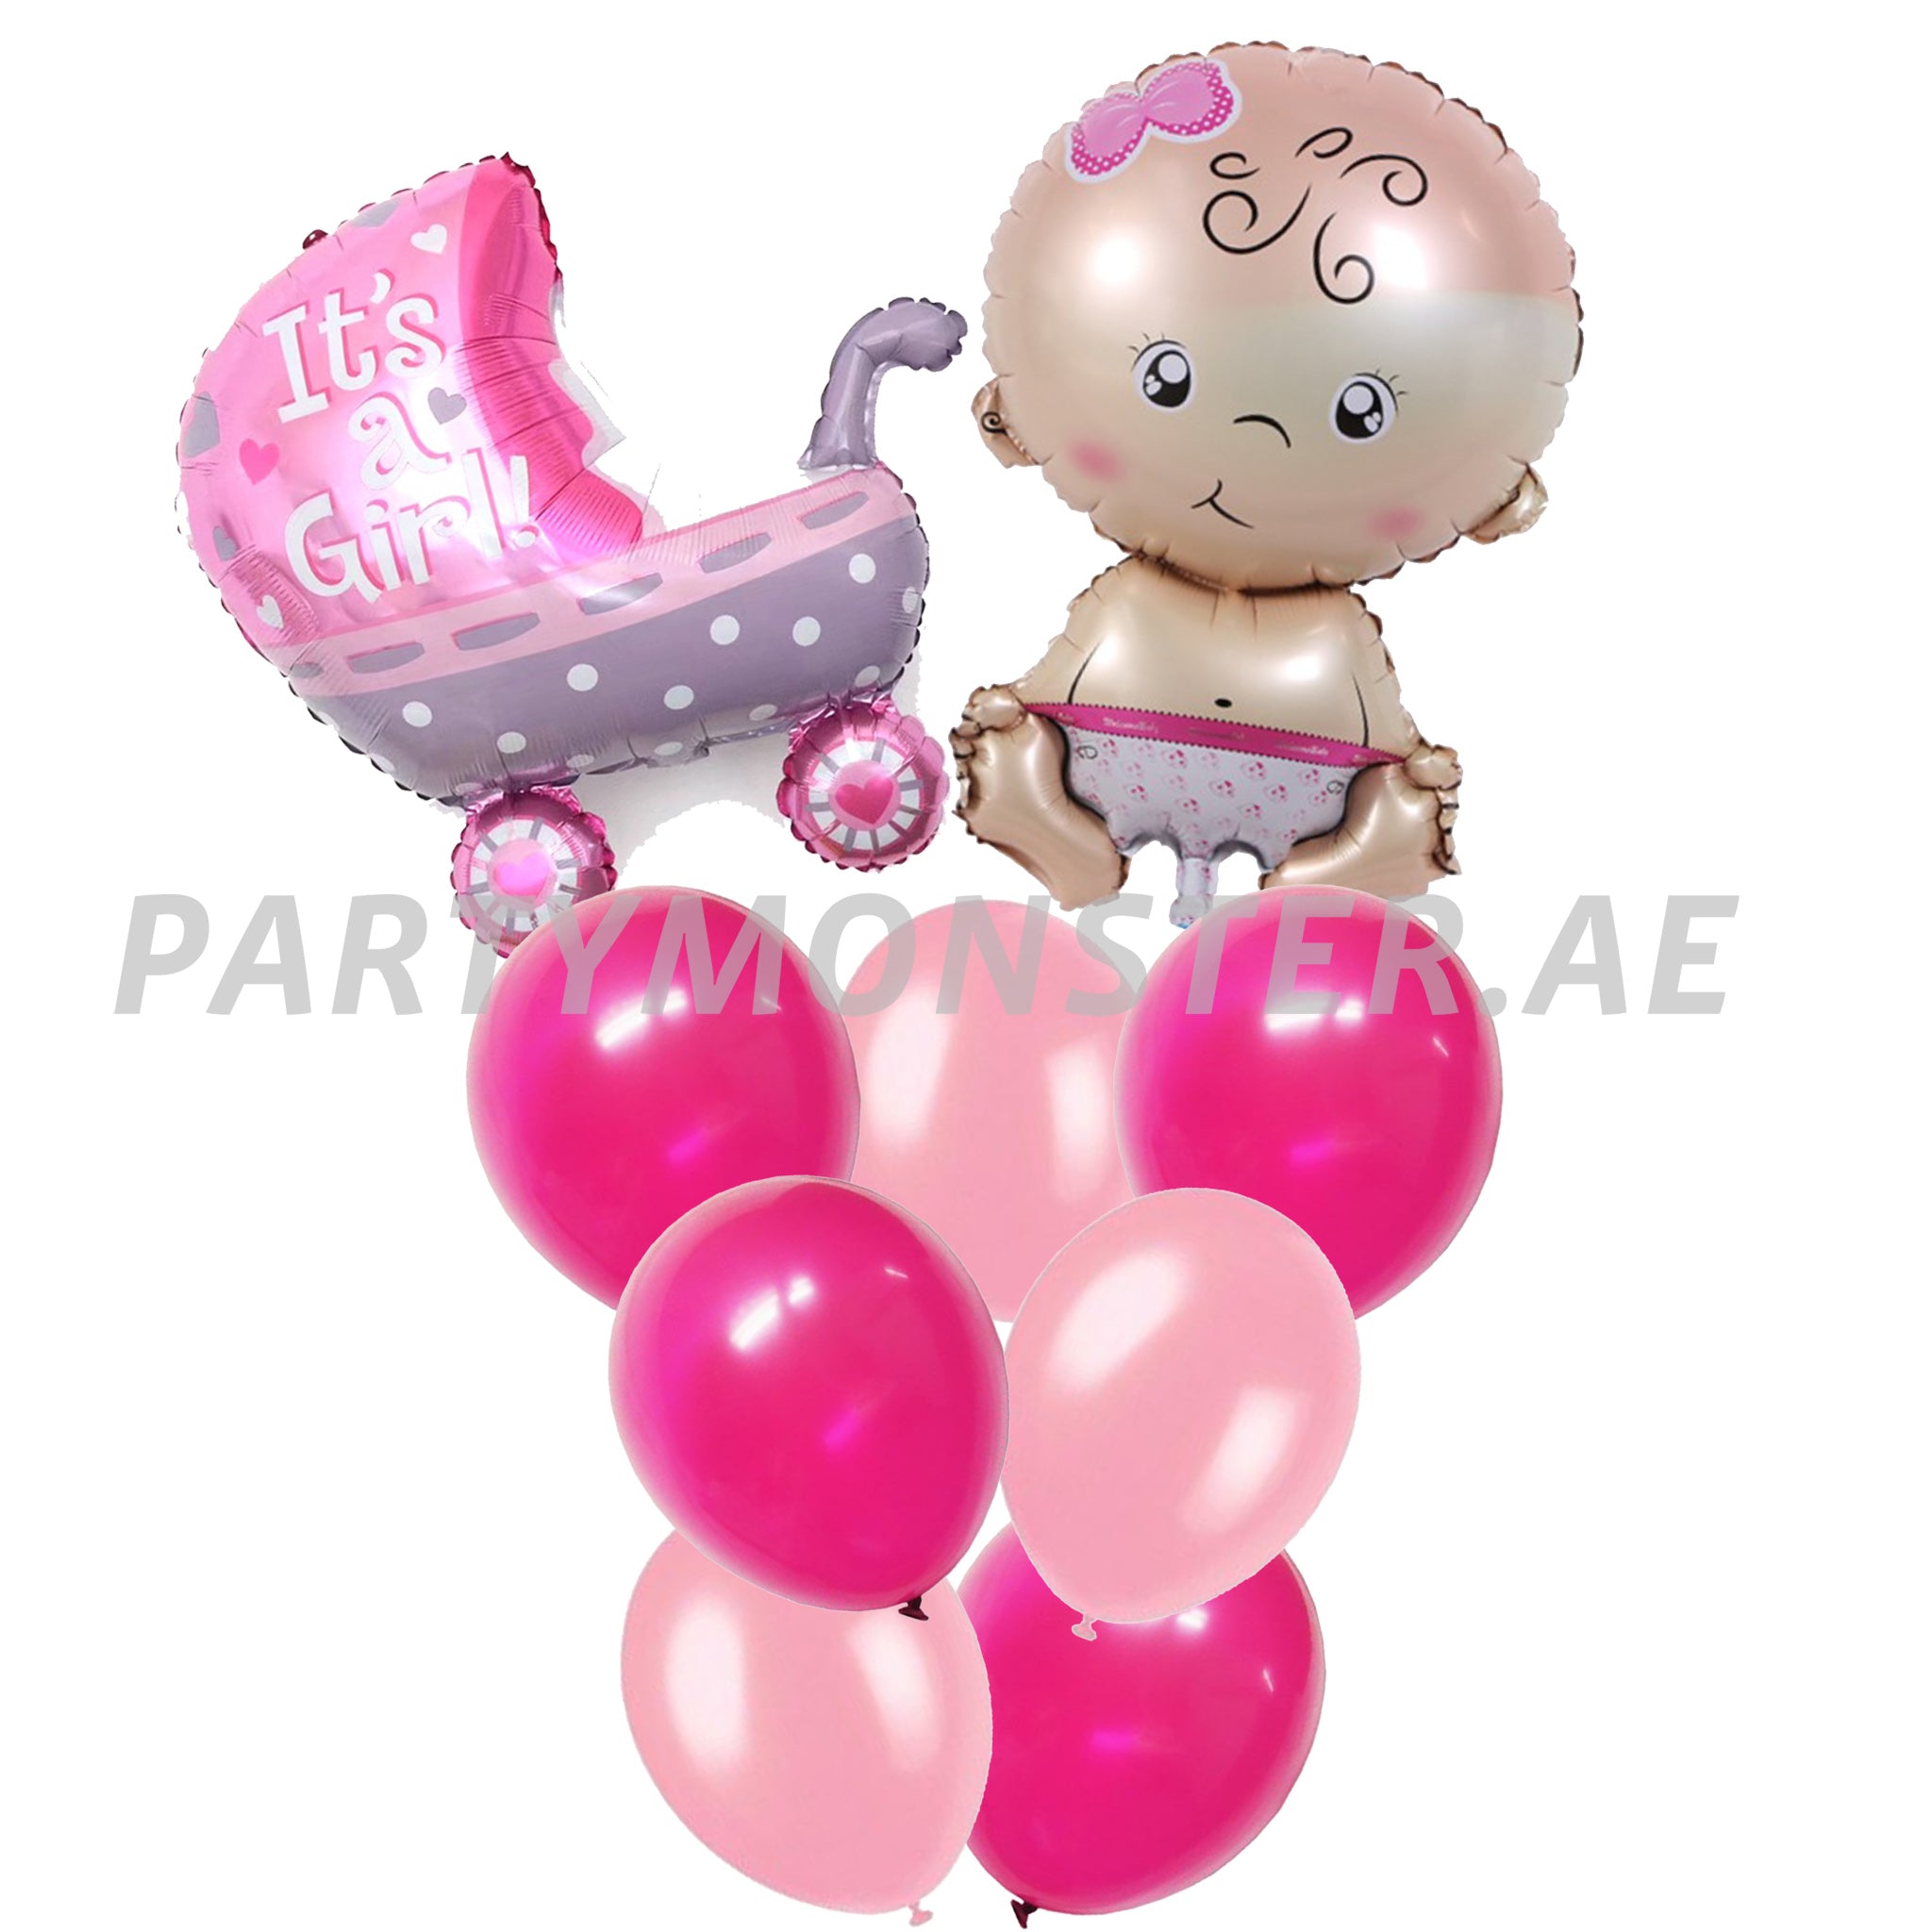 New born baby girl balloons bouquet 2 - PartyMonster.ae